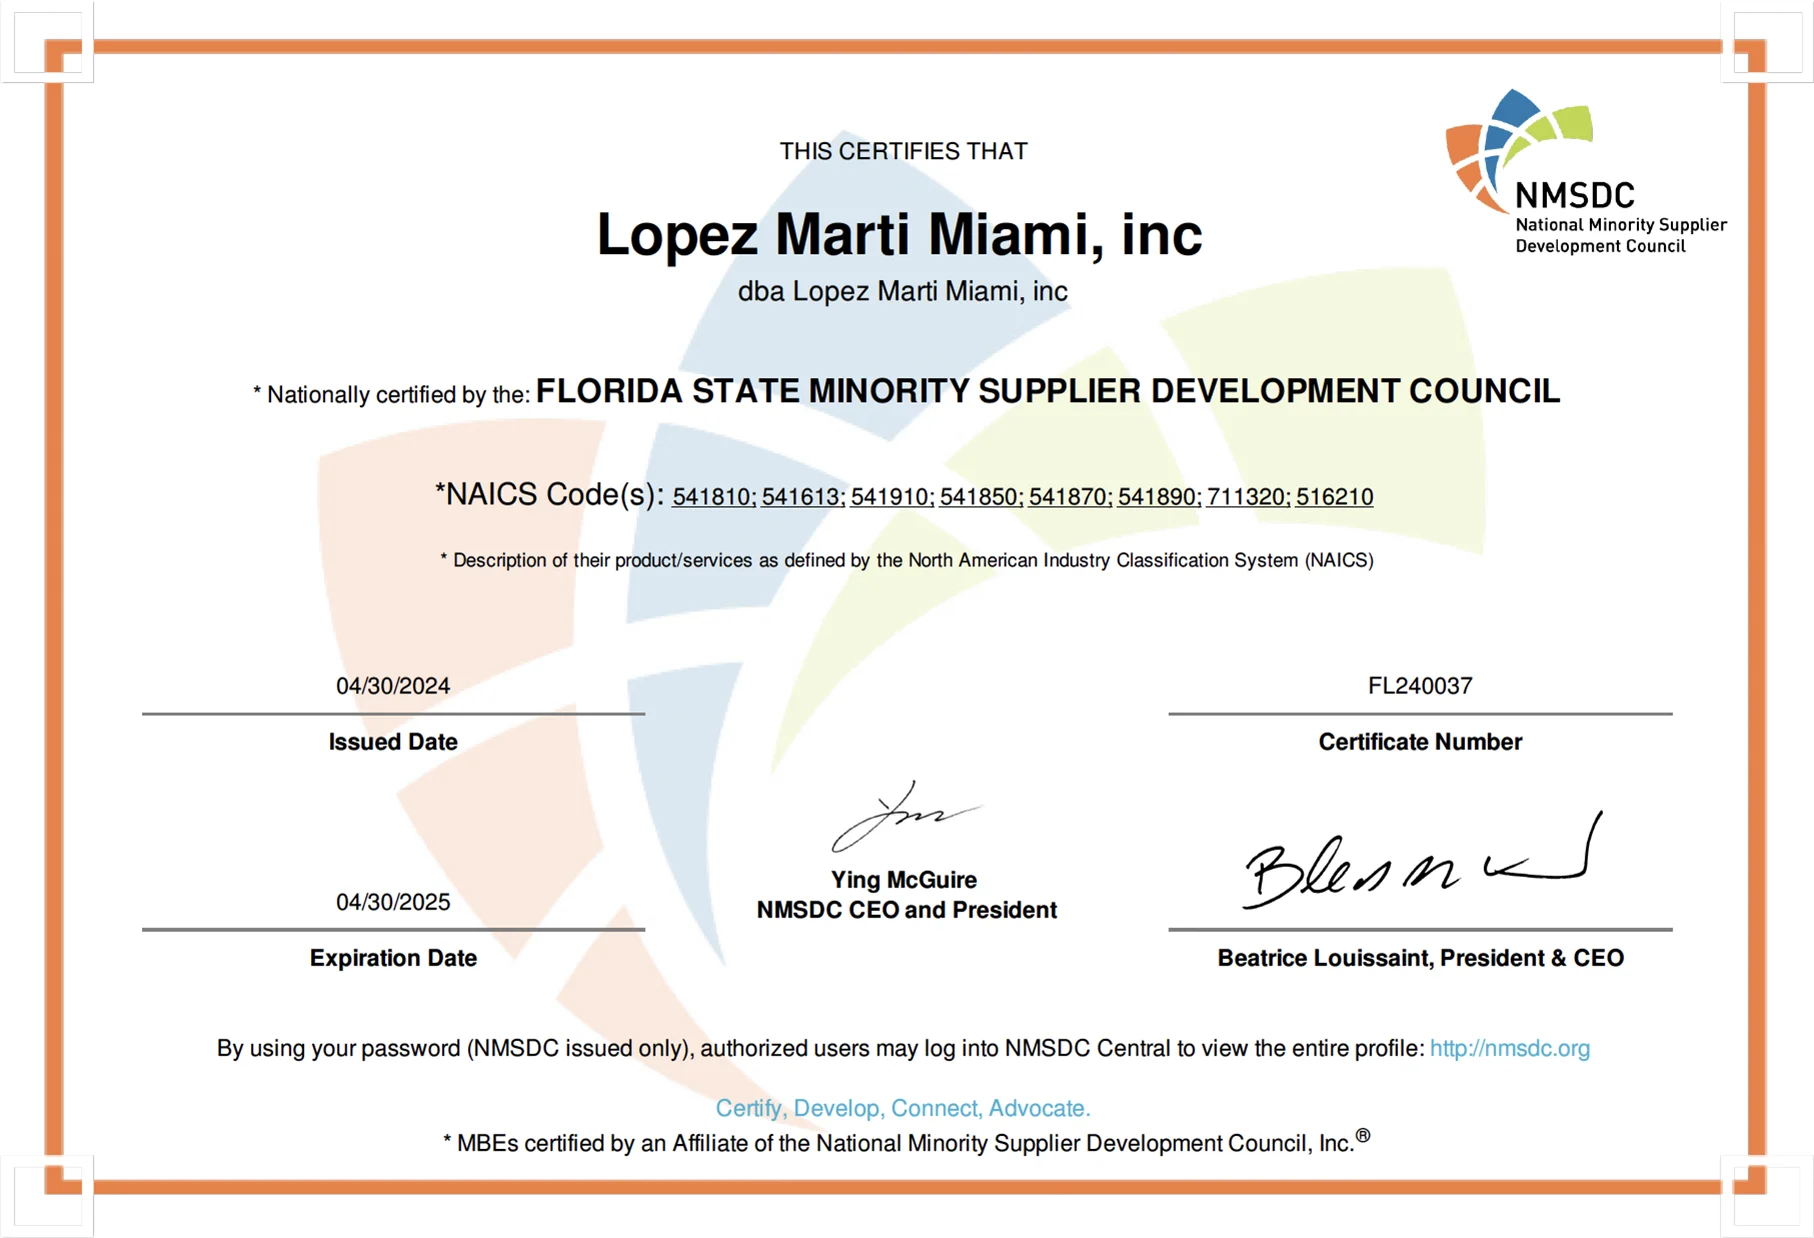 Lopez Marti Miami Inc, MBE certified by an Affiliate of the National Minority Supplier Development Council, Inc.